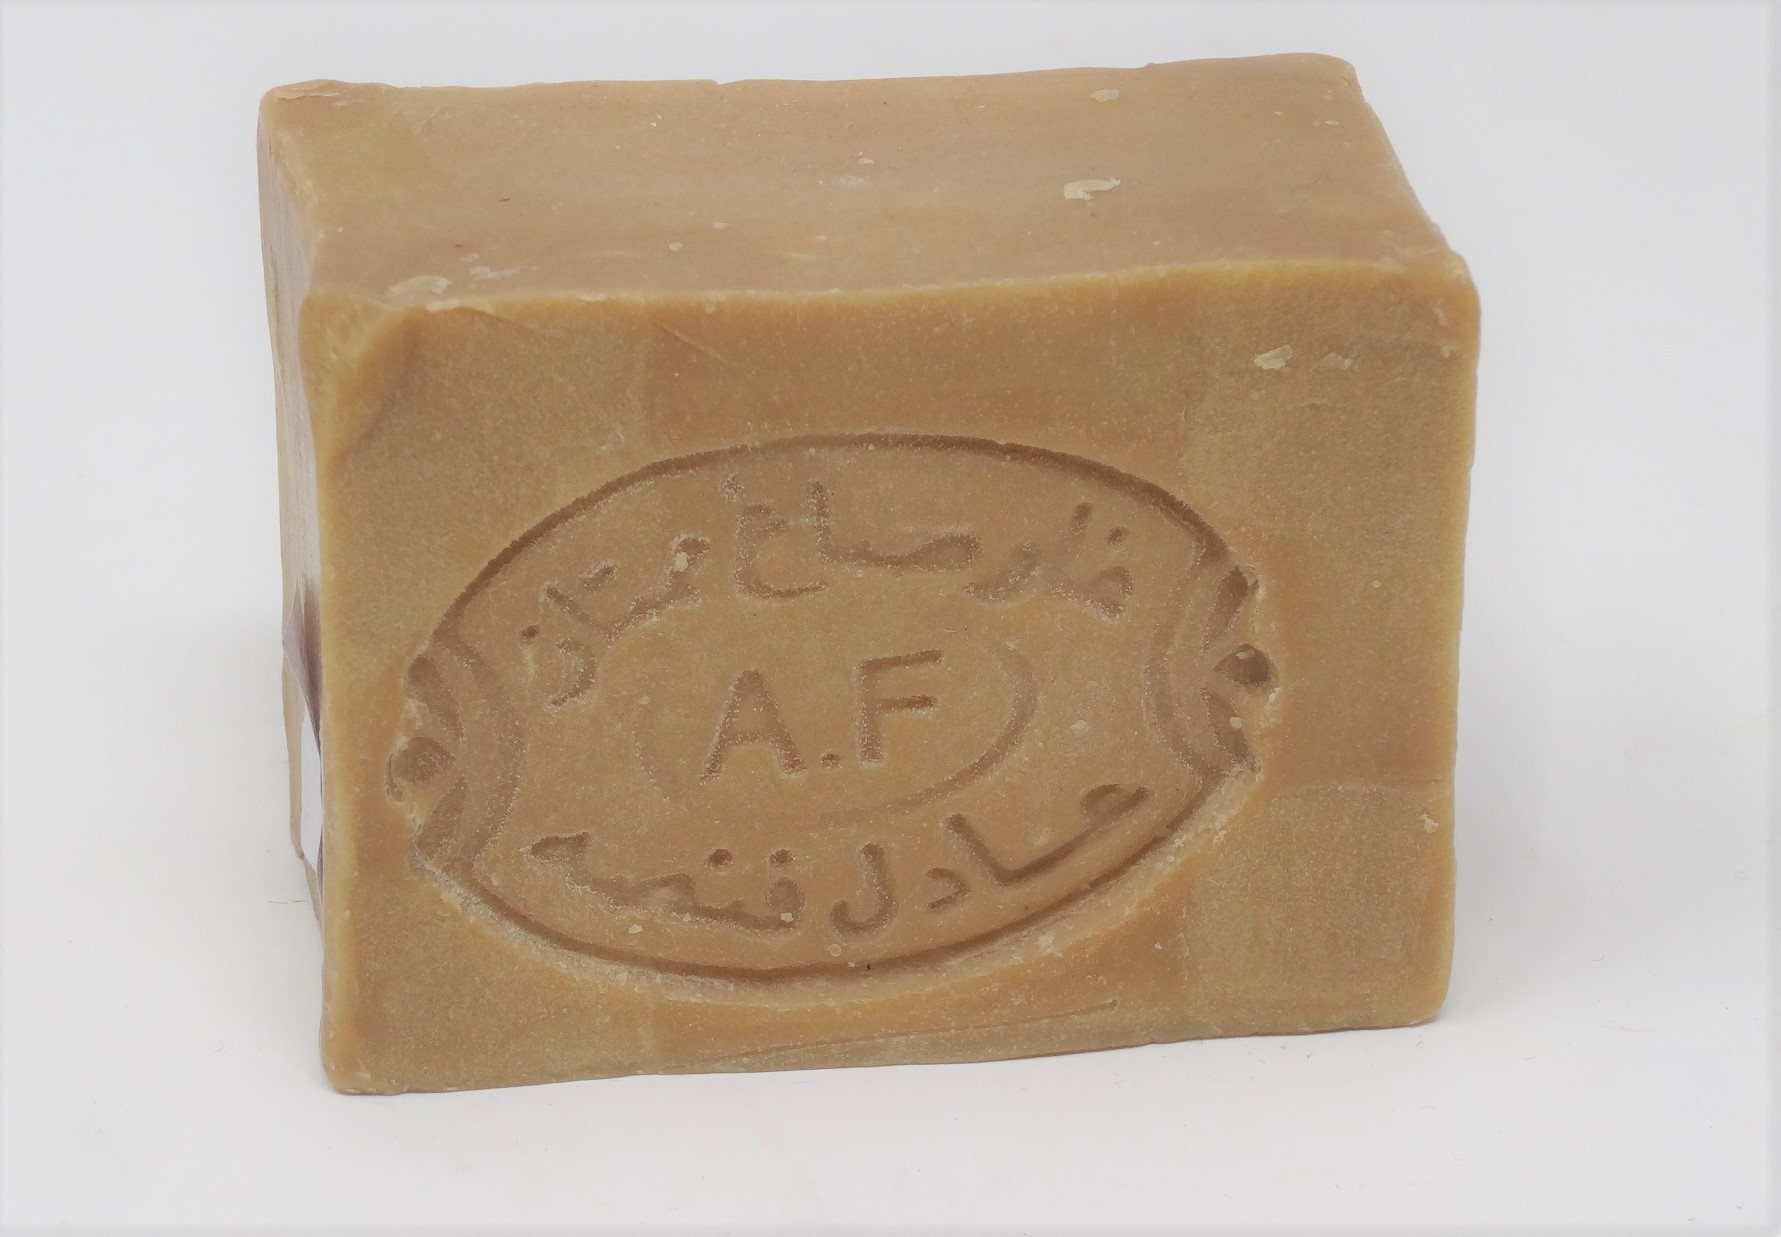 Aleppo soap with 20% Laurel fruit oil